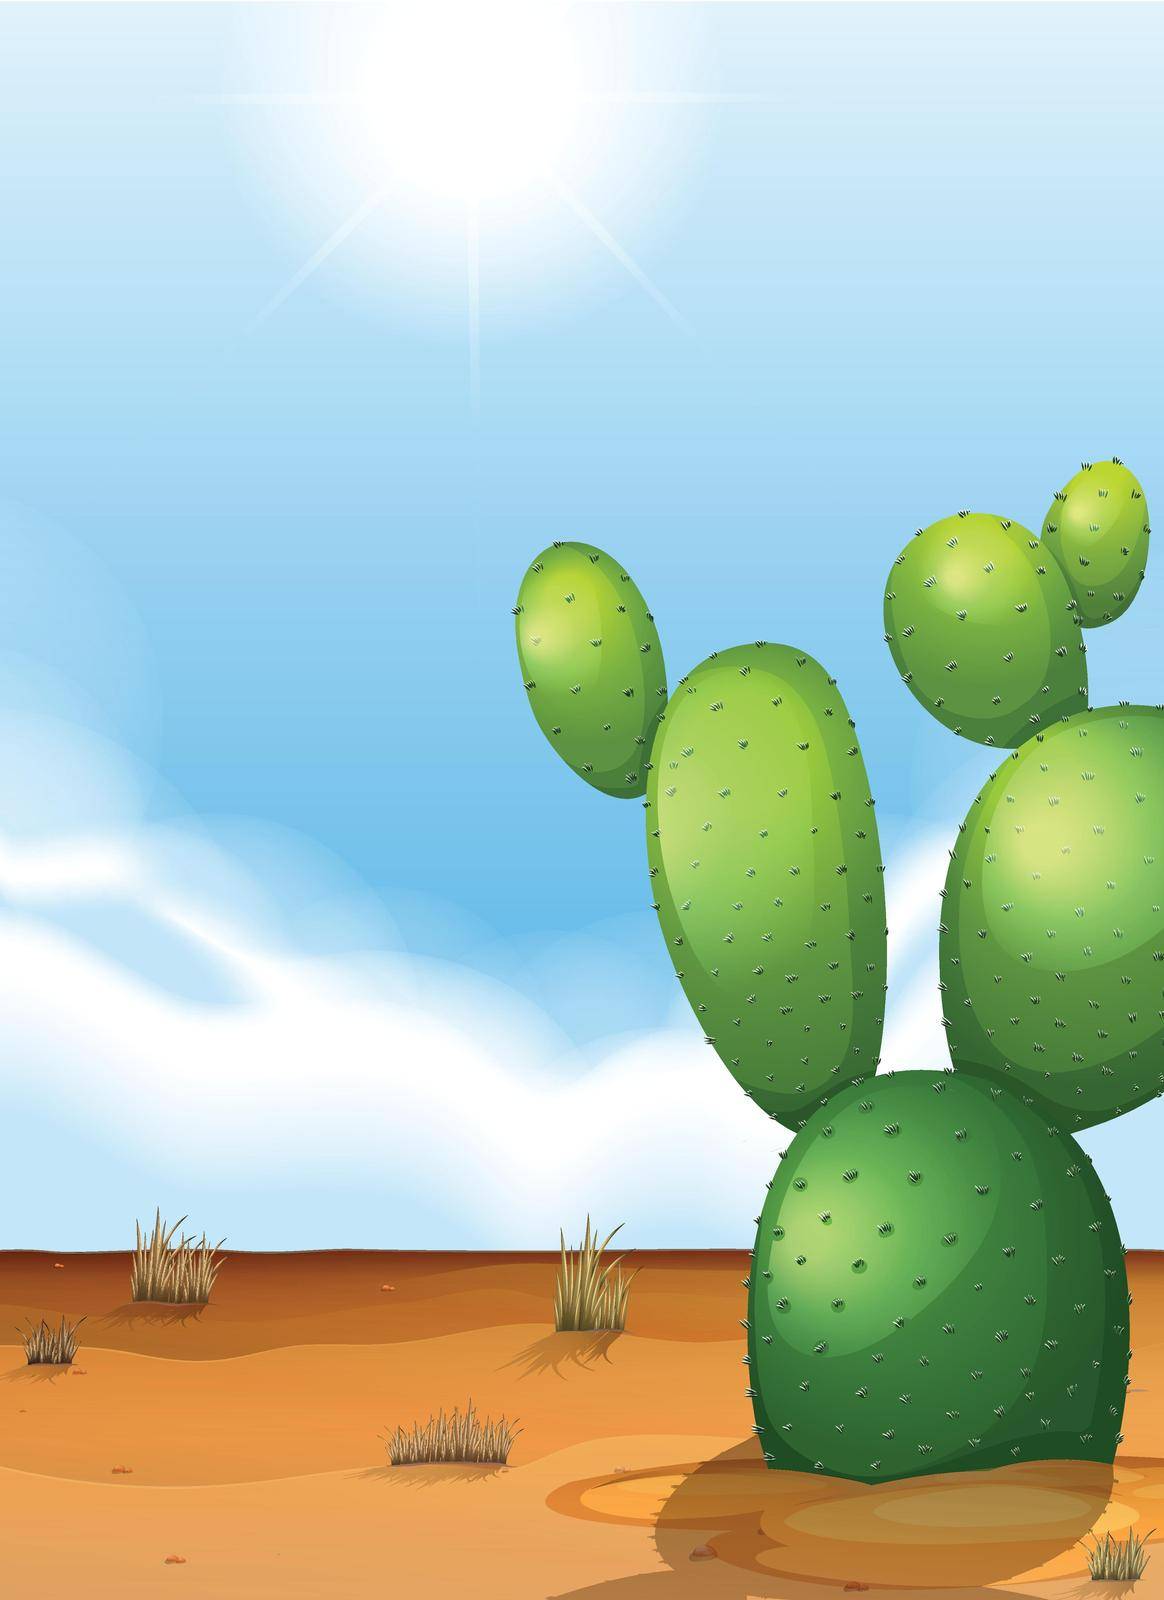 Illustration of a cactus plant in the desert